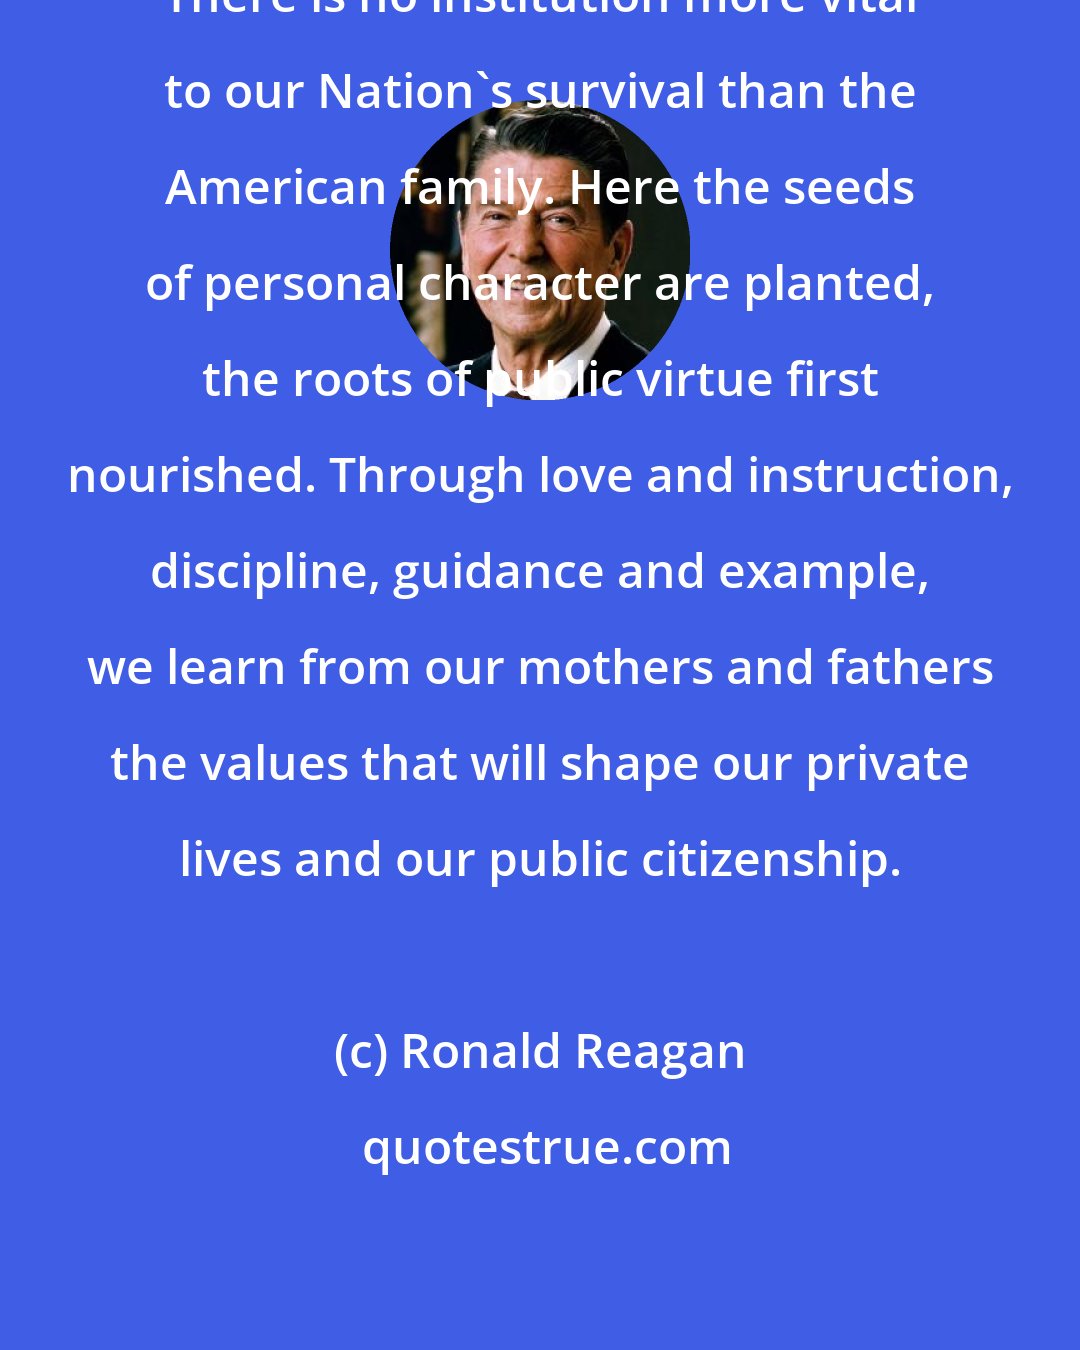 Ronald Reagan: There is no institution more vital to our Nation's survival than the American family. Here the seeds of personal character are planted, the roots of public virtue first nourished. Through love and instruction, discipline, guidance and example, we learn from our mothers and fathers the values that will shape our private lives and our public citizenship.